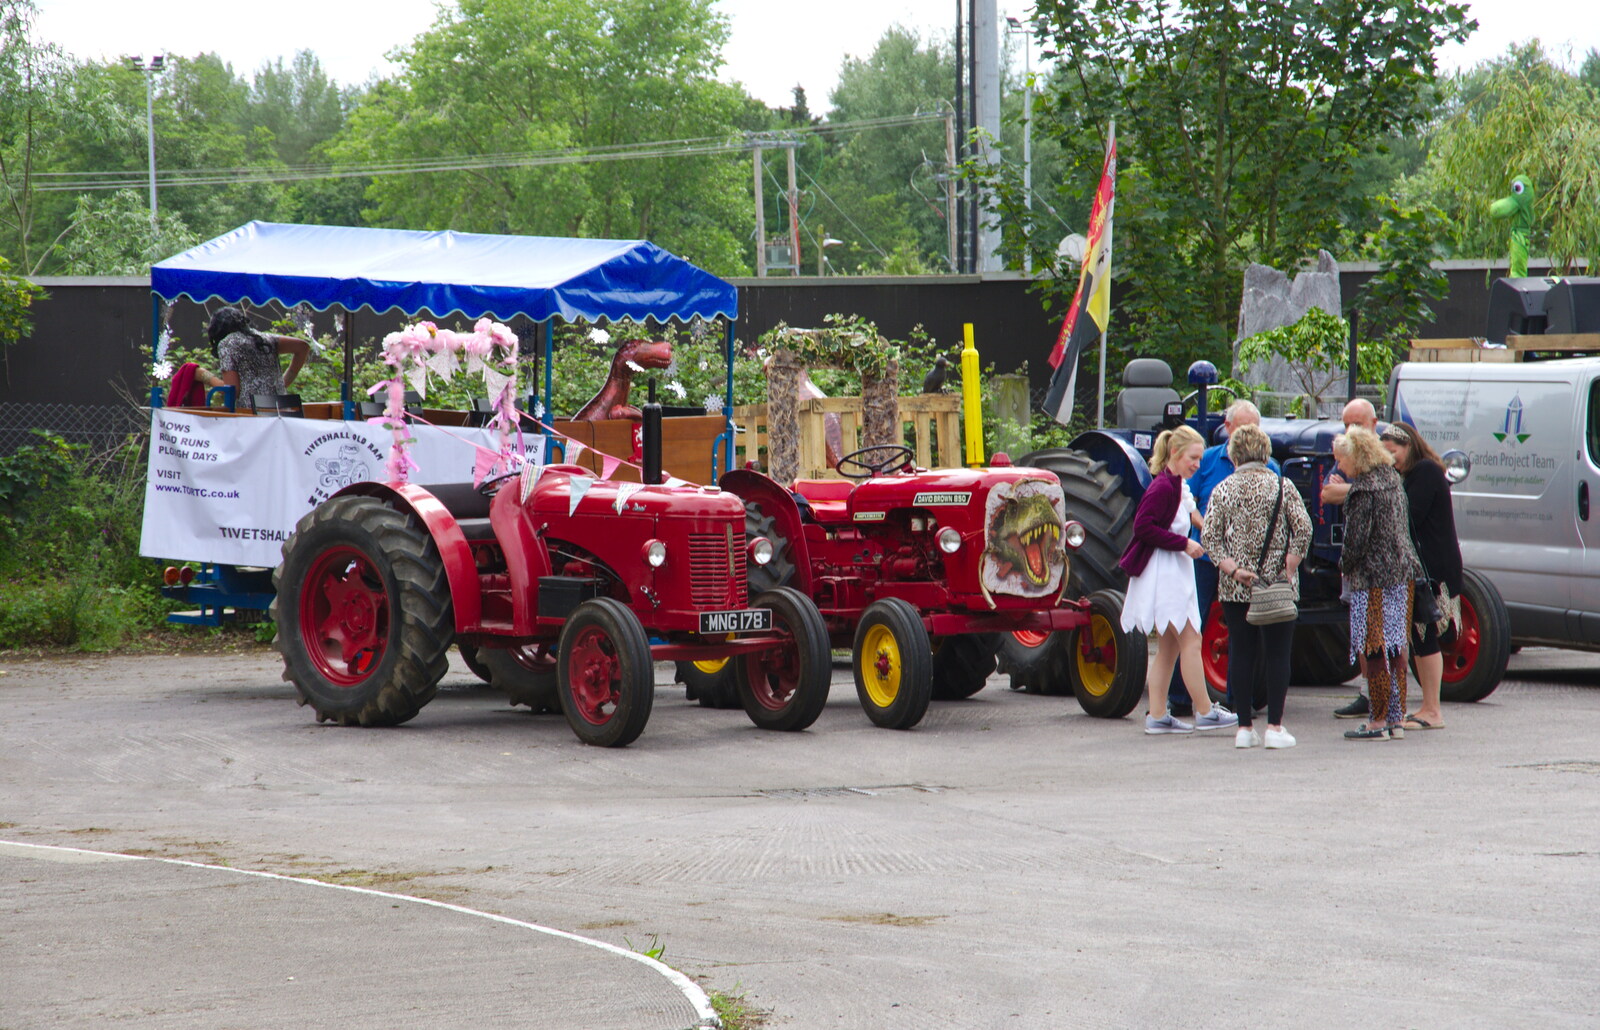 The vintage tractors are parked up from The Diss Carnival 2019, Diss, Norfolk - 9th June 2019